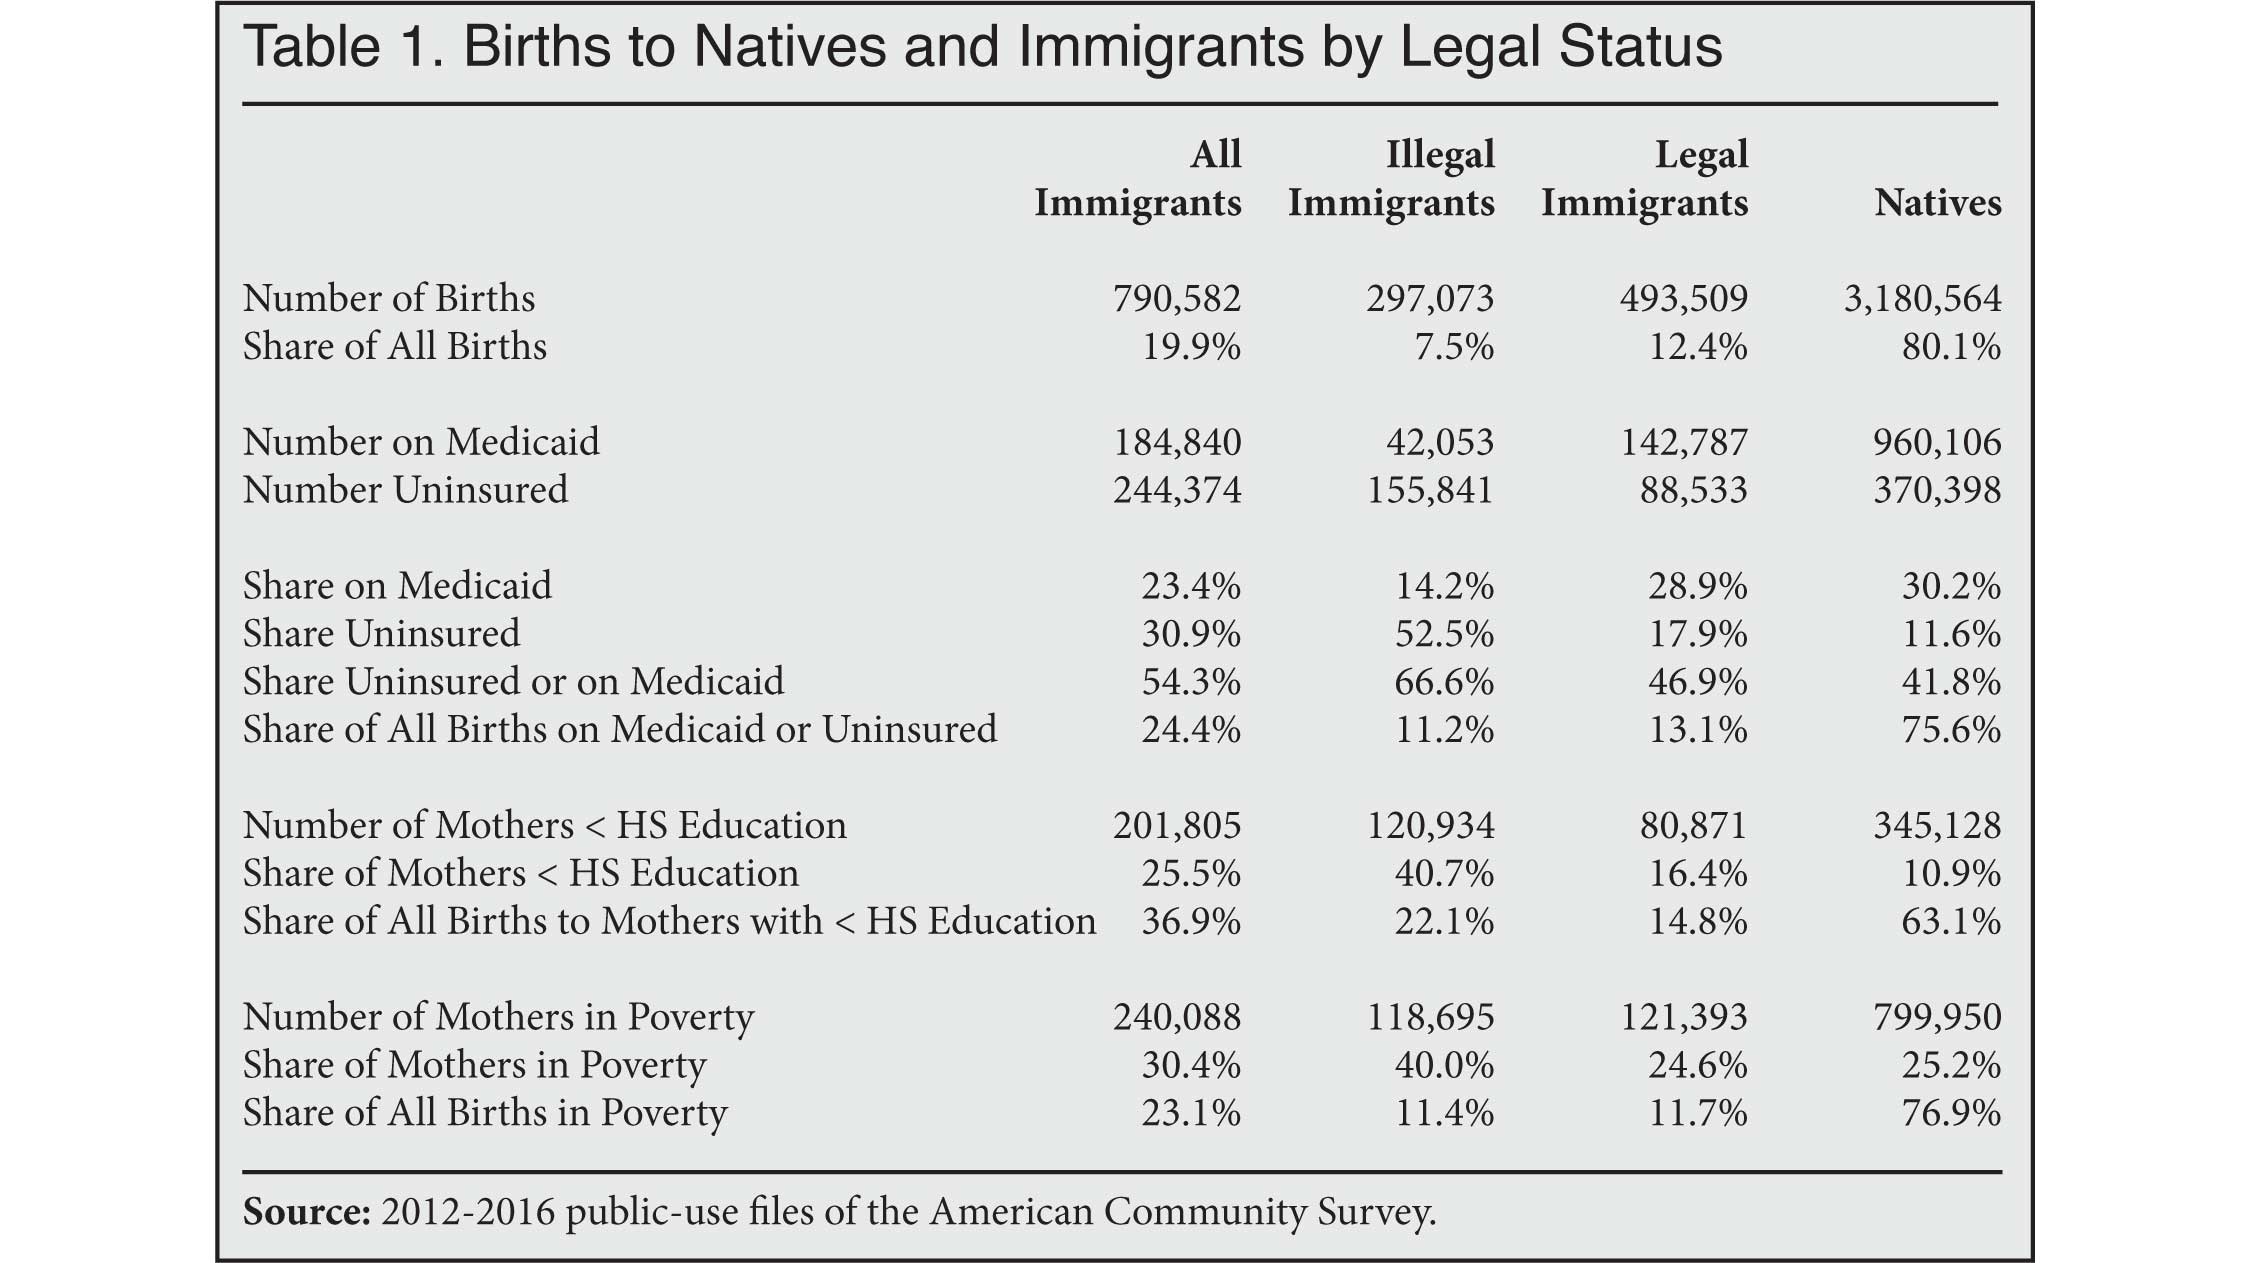 Table: Births to Natives and Immigrants by Legal Status